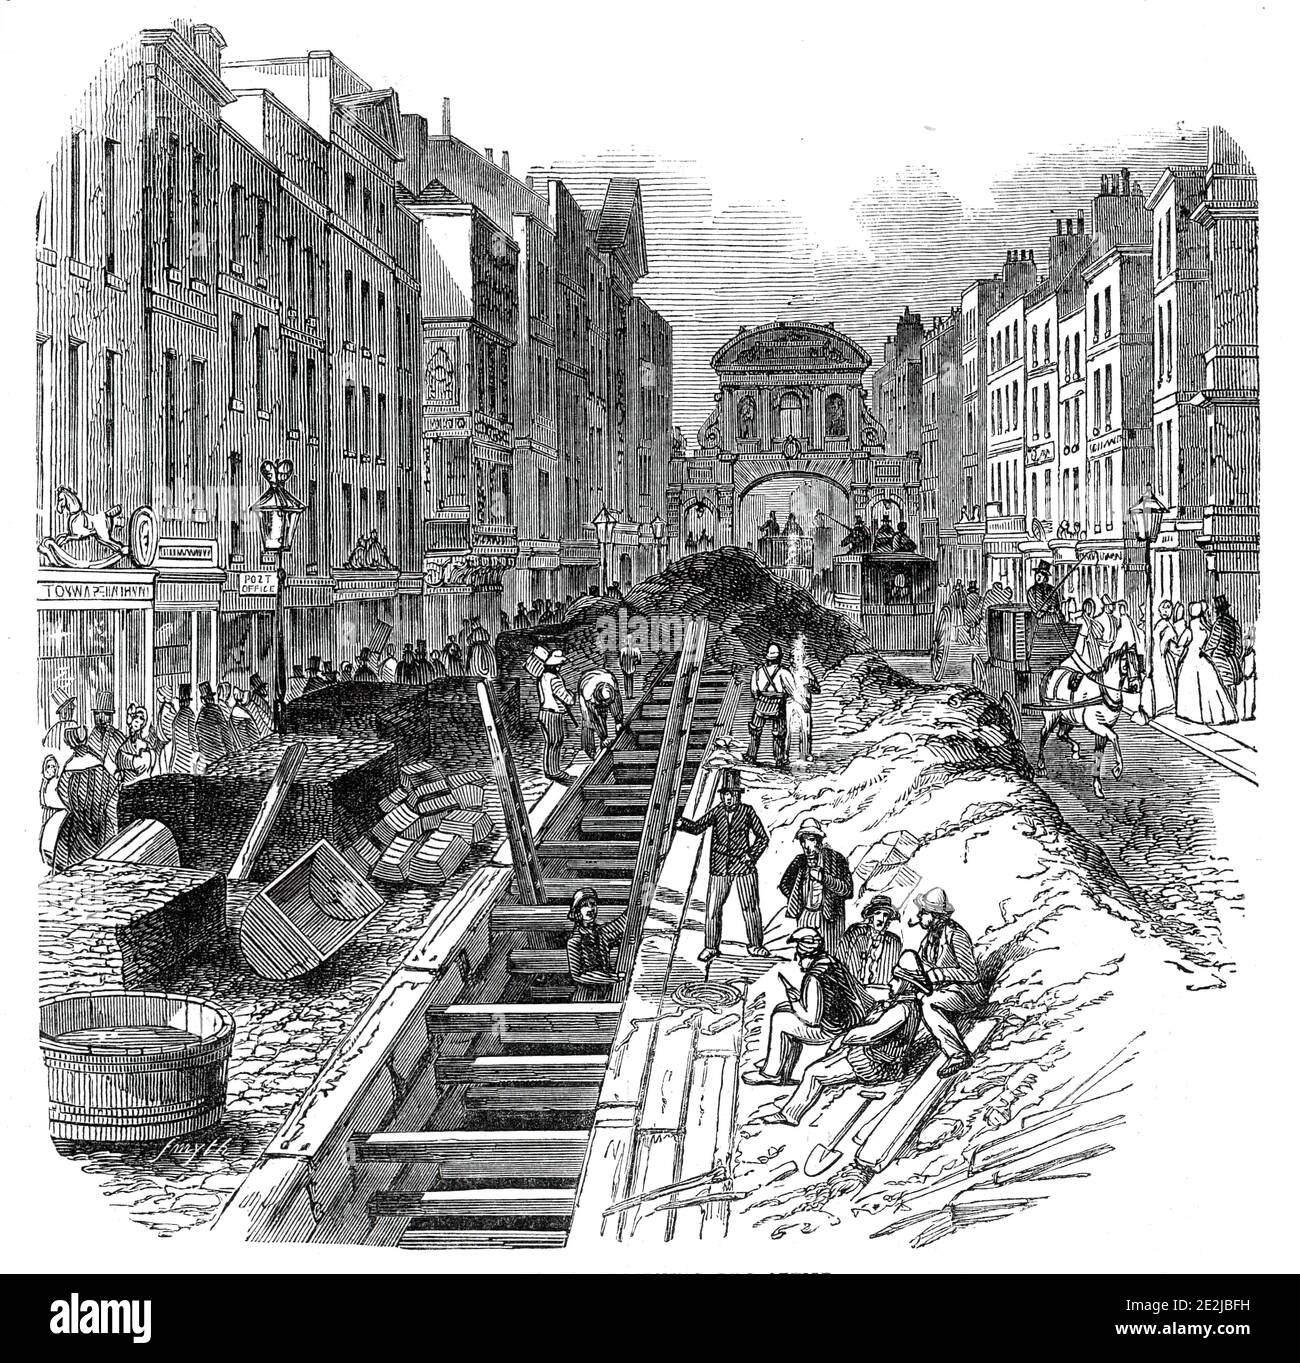 Fleet-Street, deepening the sewer, 1845. Workers improving the underground waste system in London, with Temple Bar in the distance. '...the difficulty of keeping open the traffic, so as not to extinguish the &quot;very animated appearance&quot; of Fleet-street, is a work of much difficulty. The cost of the present undertaking, contracted for by Messrs. Ward and Son, of Aldersgate- street, is &#xa3;2000...There do not appear to be published data from which the total extent of the metropolitan Sewers can be ascertained. The Holbom and Finsbury divisions contain eighty three miles. In addition to Stock Photo